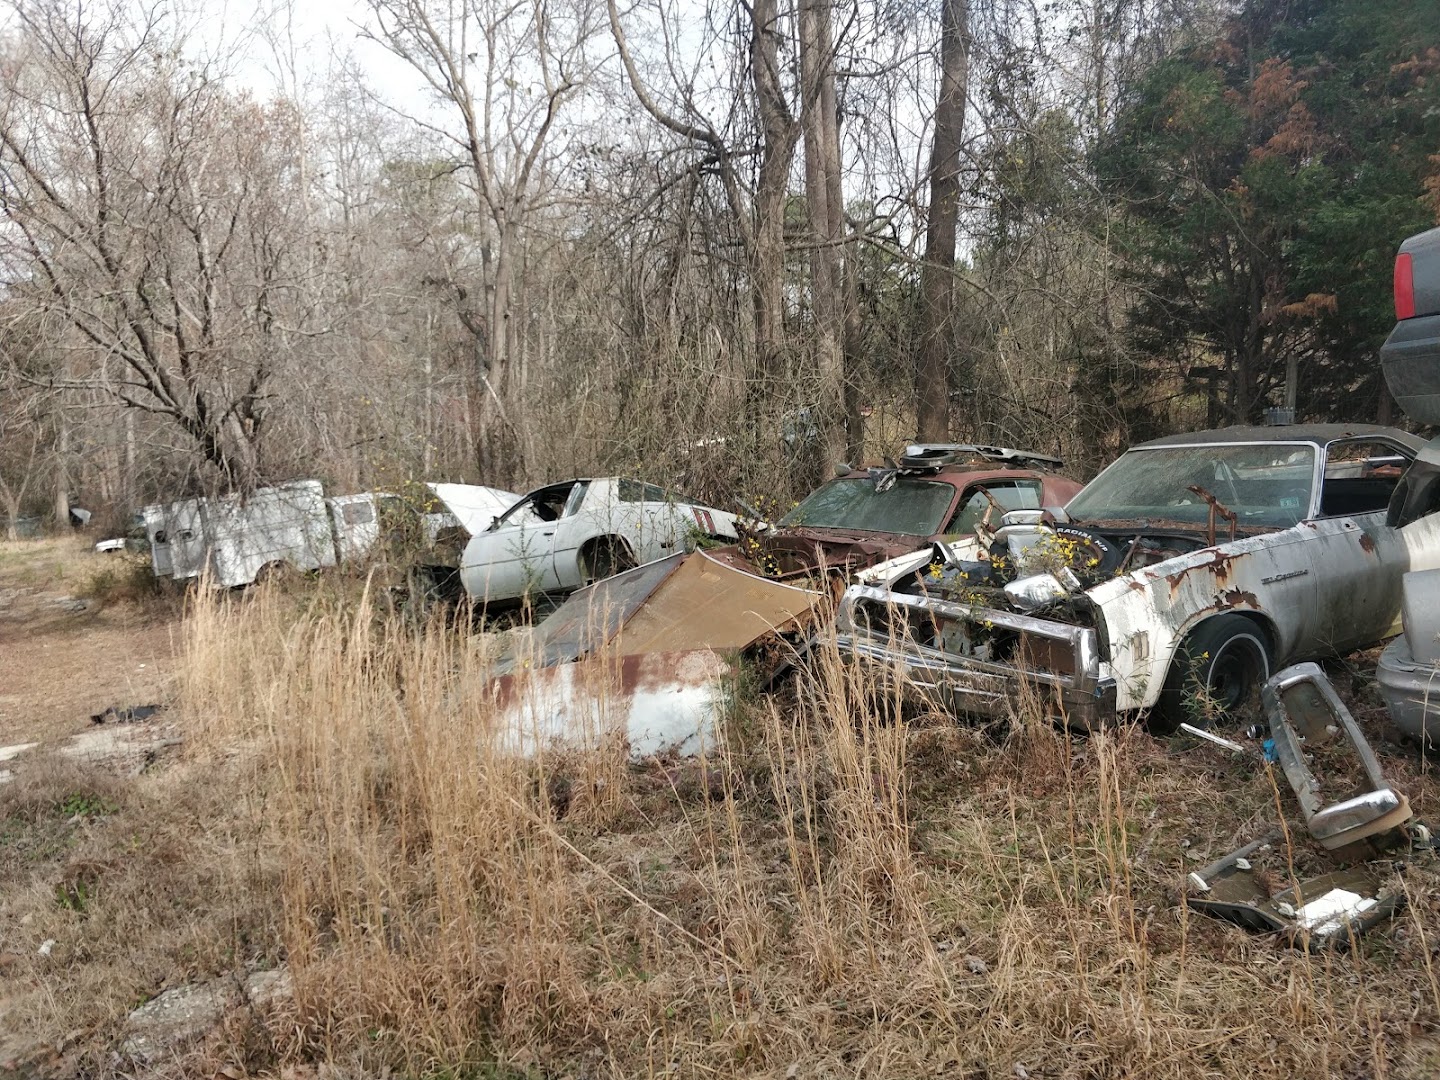 Salvage yard In Fayetteville NC 